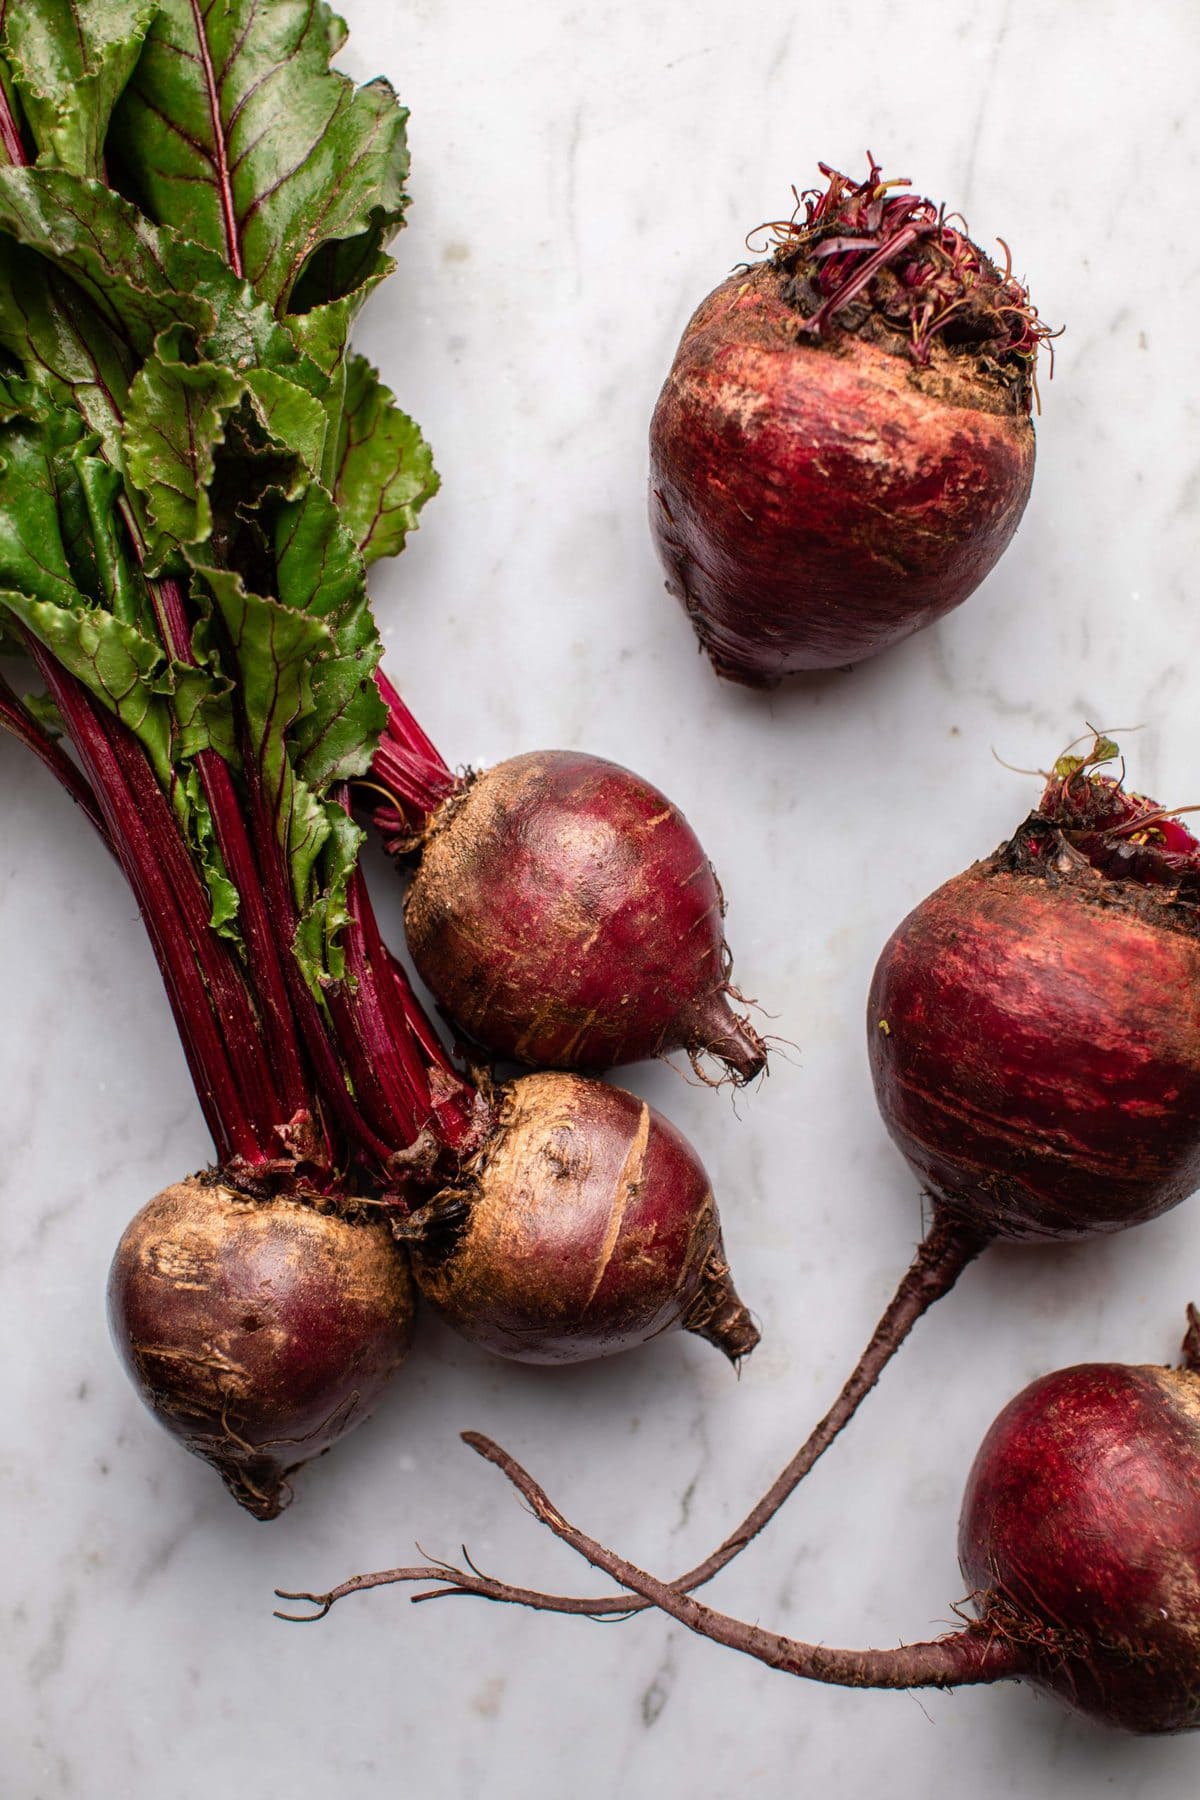 beets with greens and beet bulbs on marble background